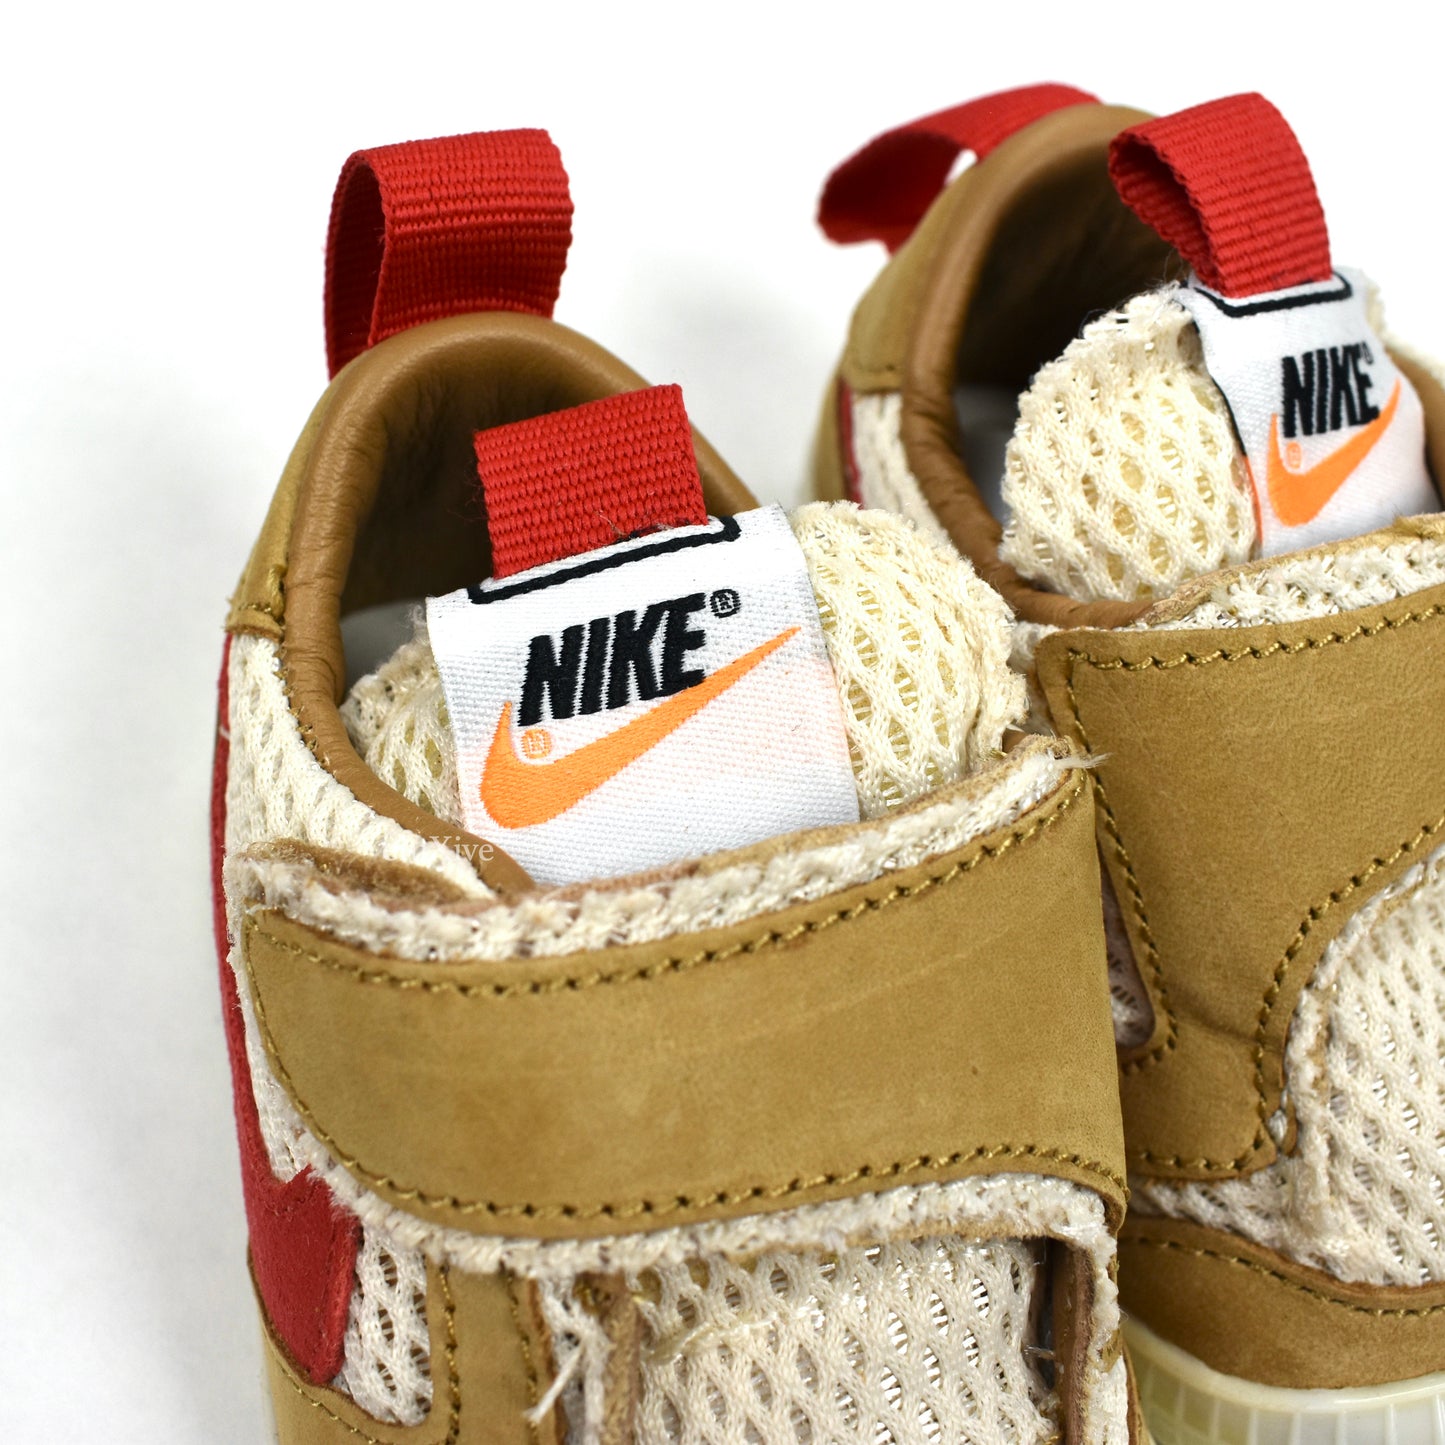 Nike x Tom Sachs - Mards Yard CB Infant/Baby Sneakers